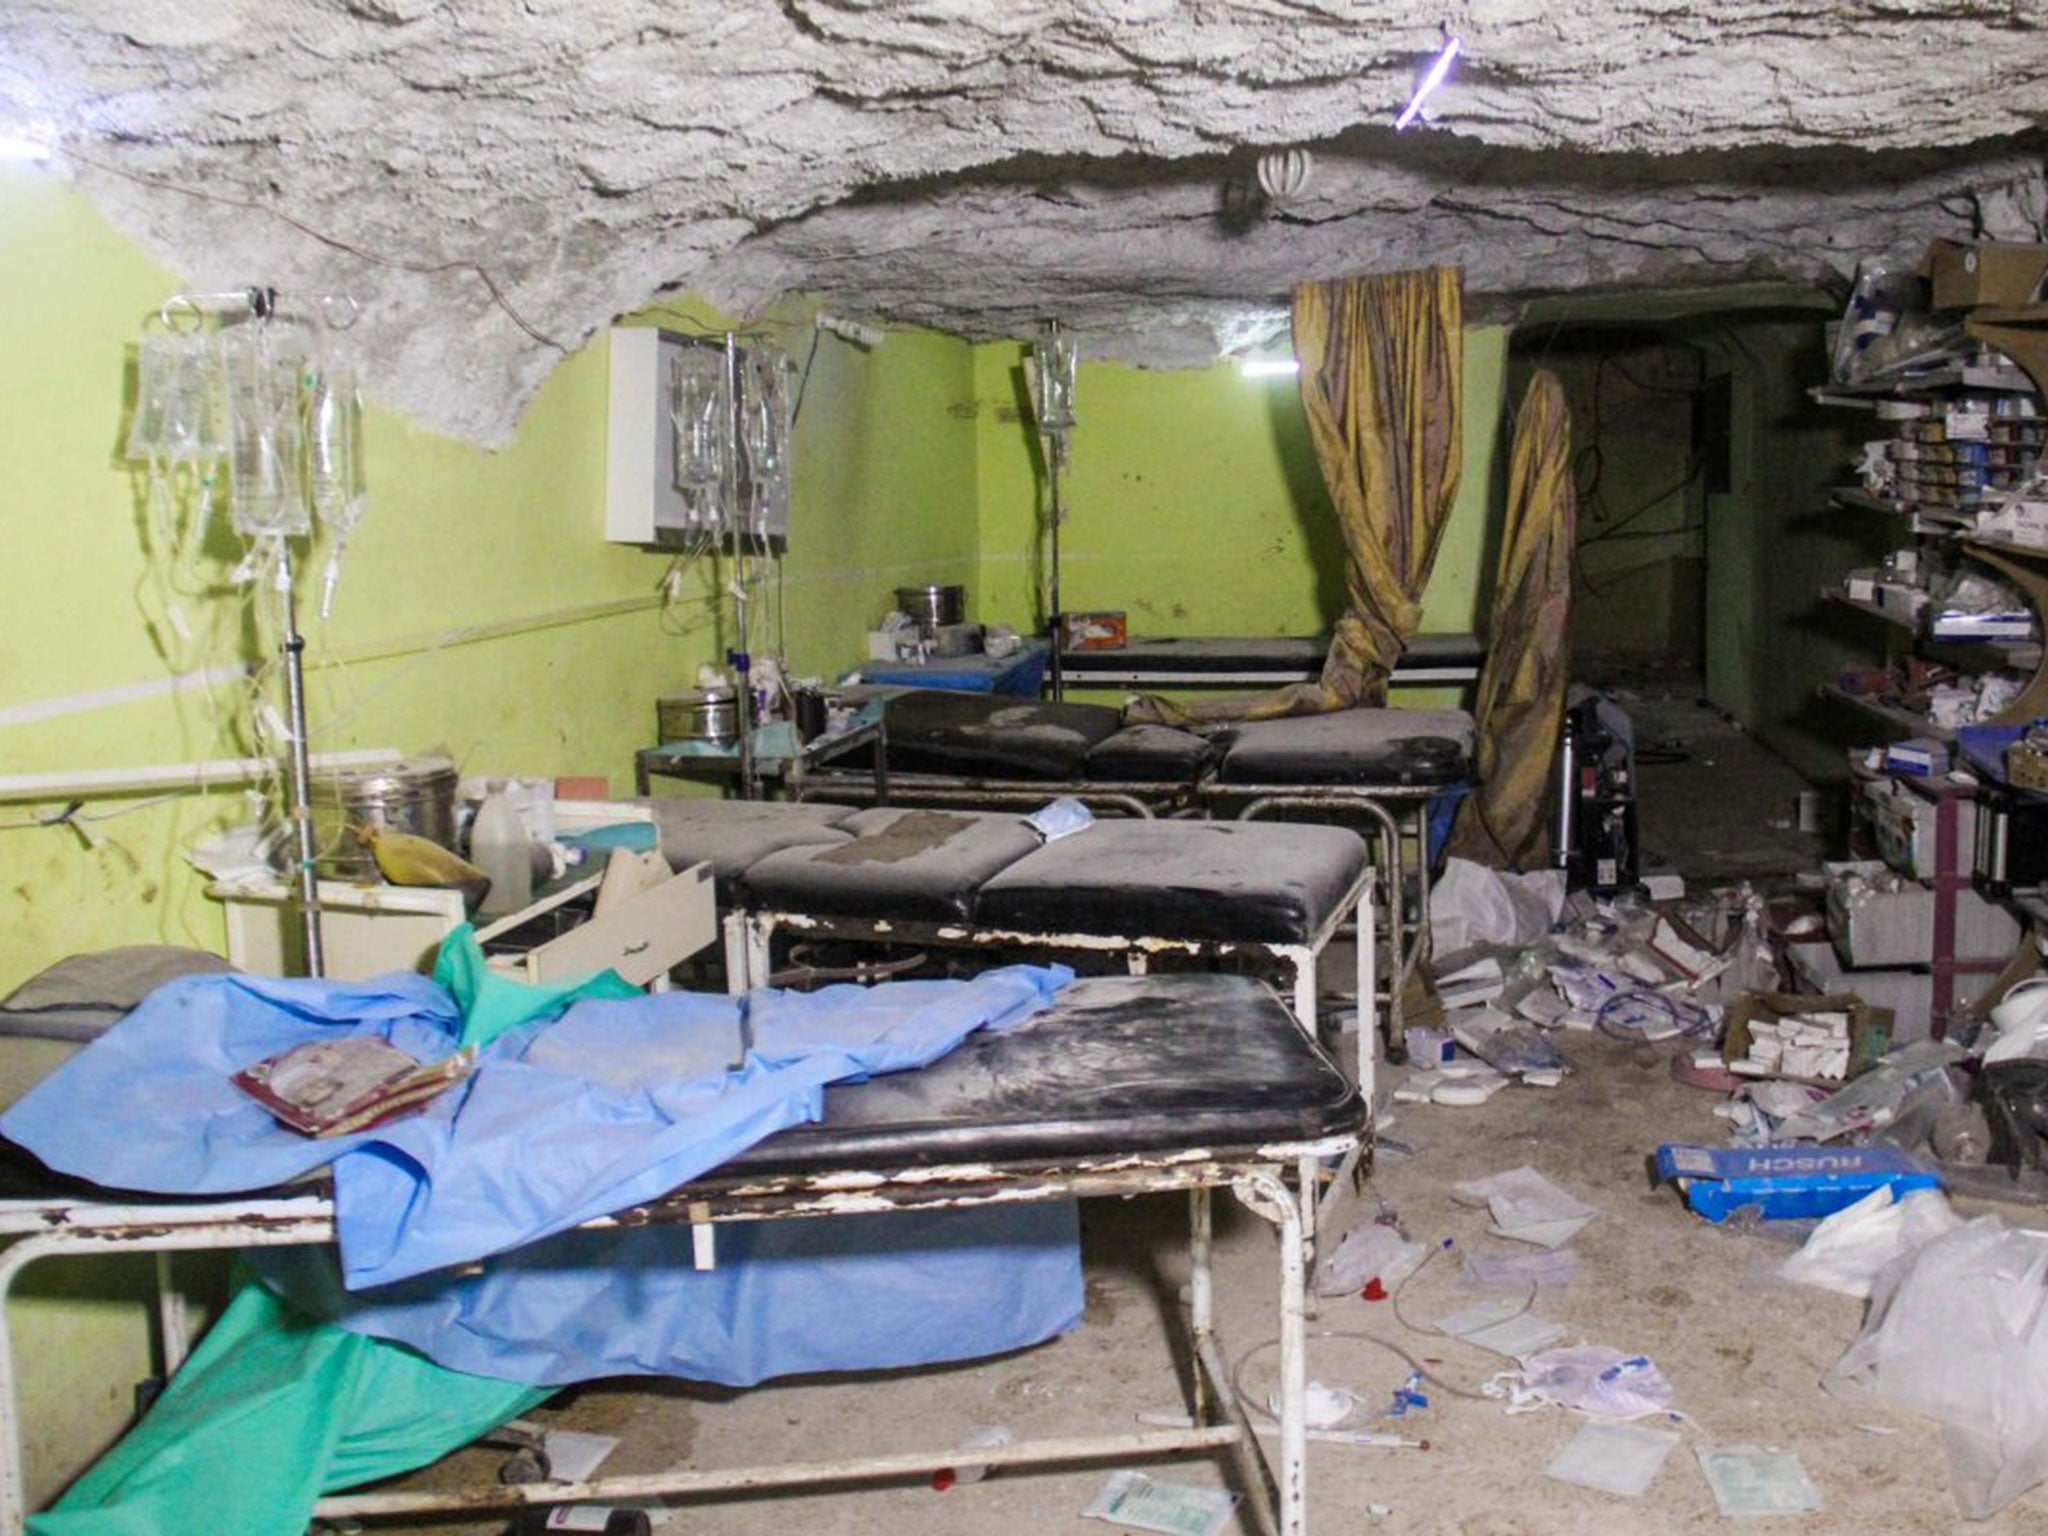 Destruction at a hospital that was bombed while treating victims of a suspected chemical attack in Khan Sheikhoun, Idlib, on 4 April